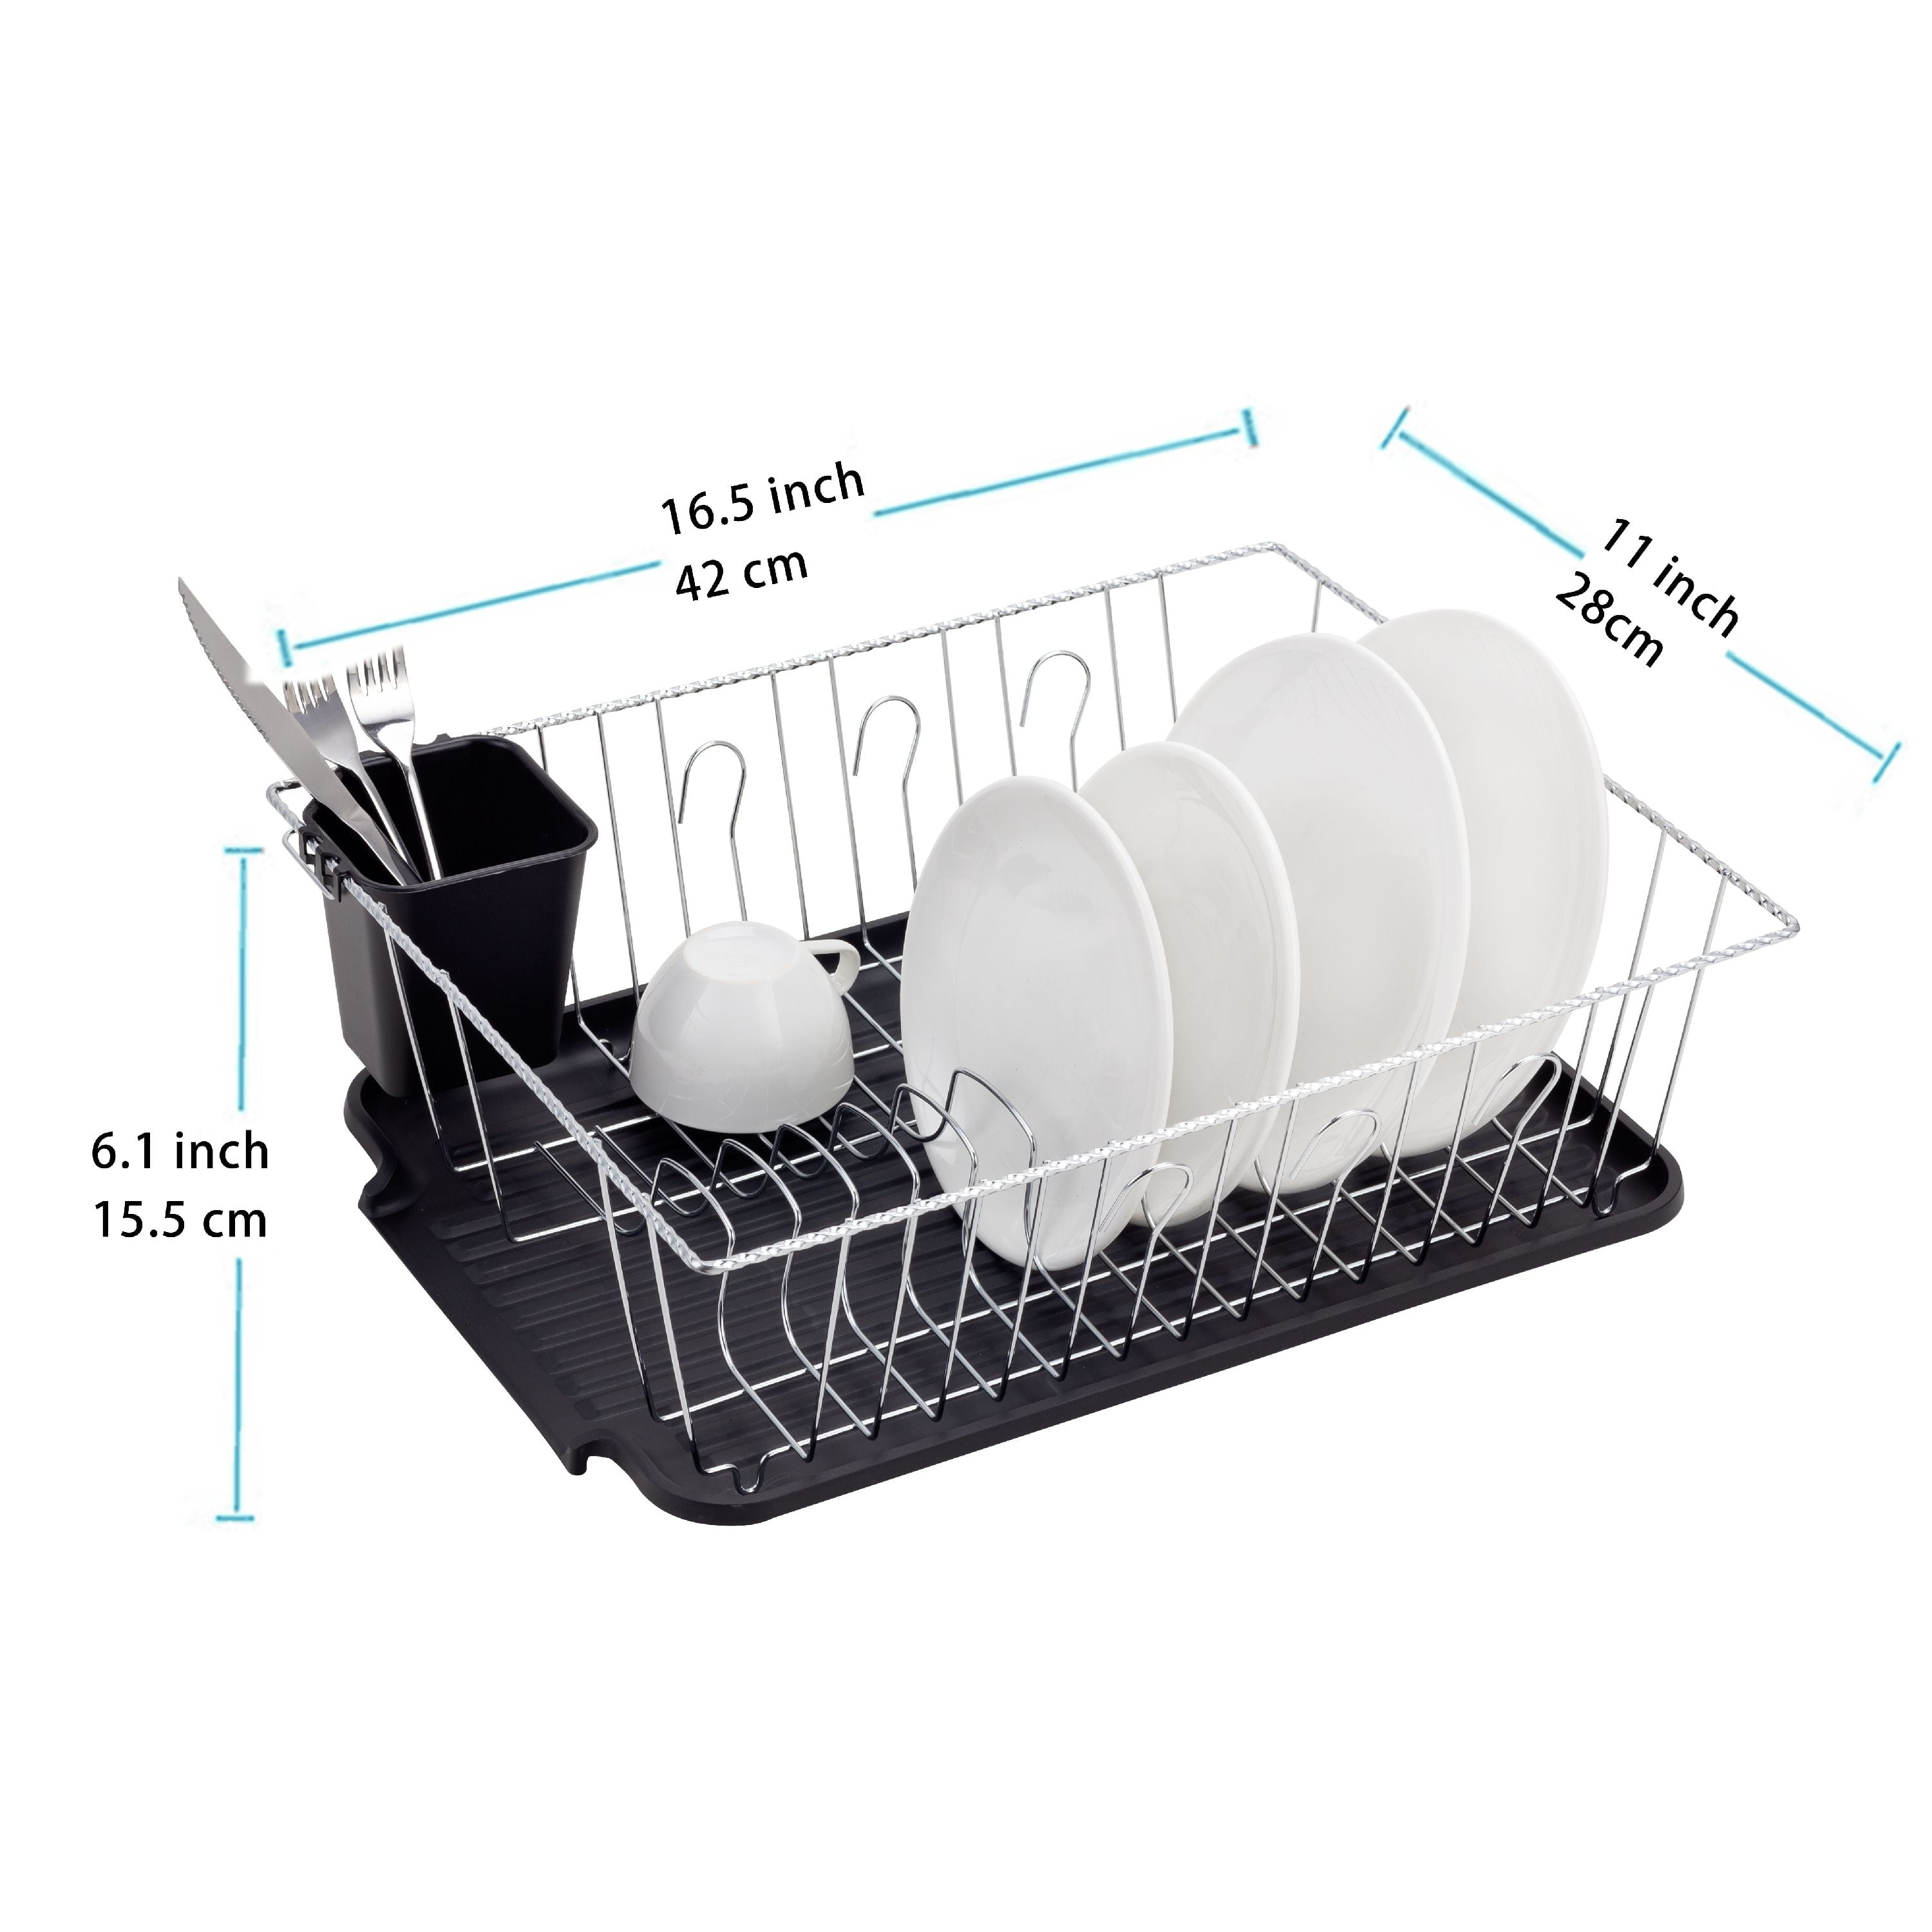 Hastings Home 12.5-in W x 16.5-in L x 13-in H Wood Dish Rack at